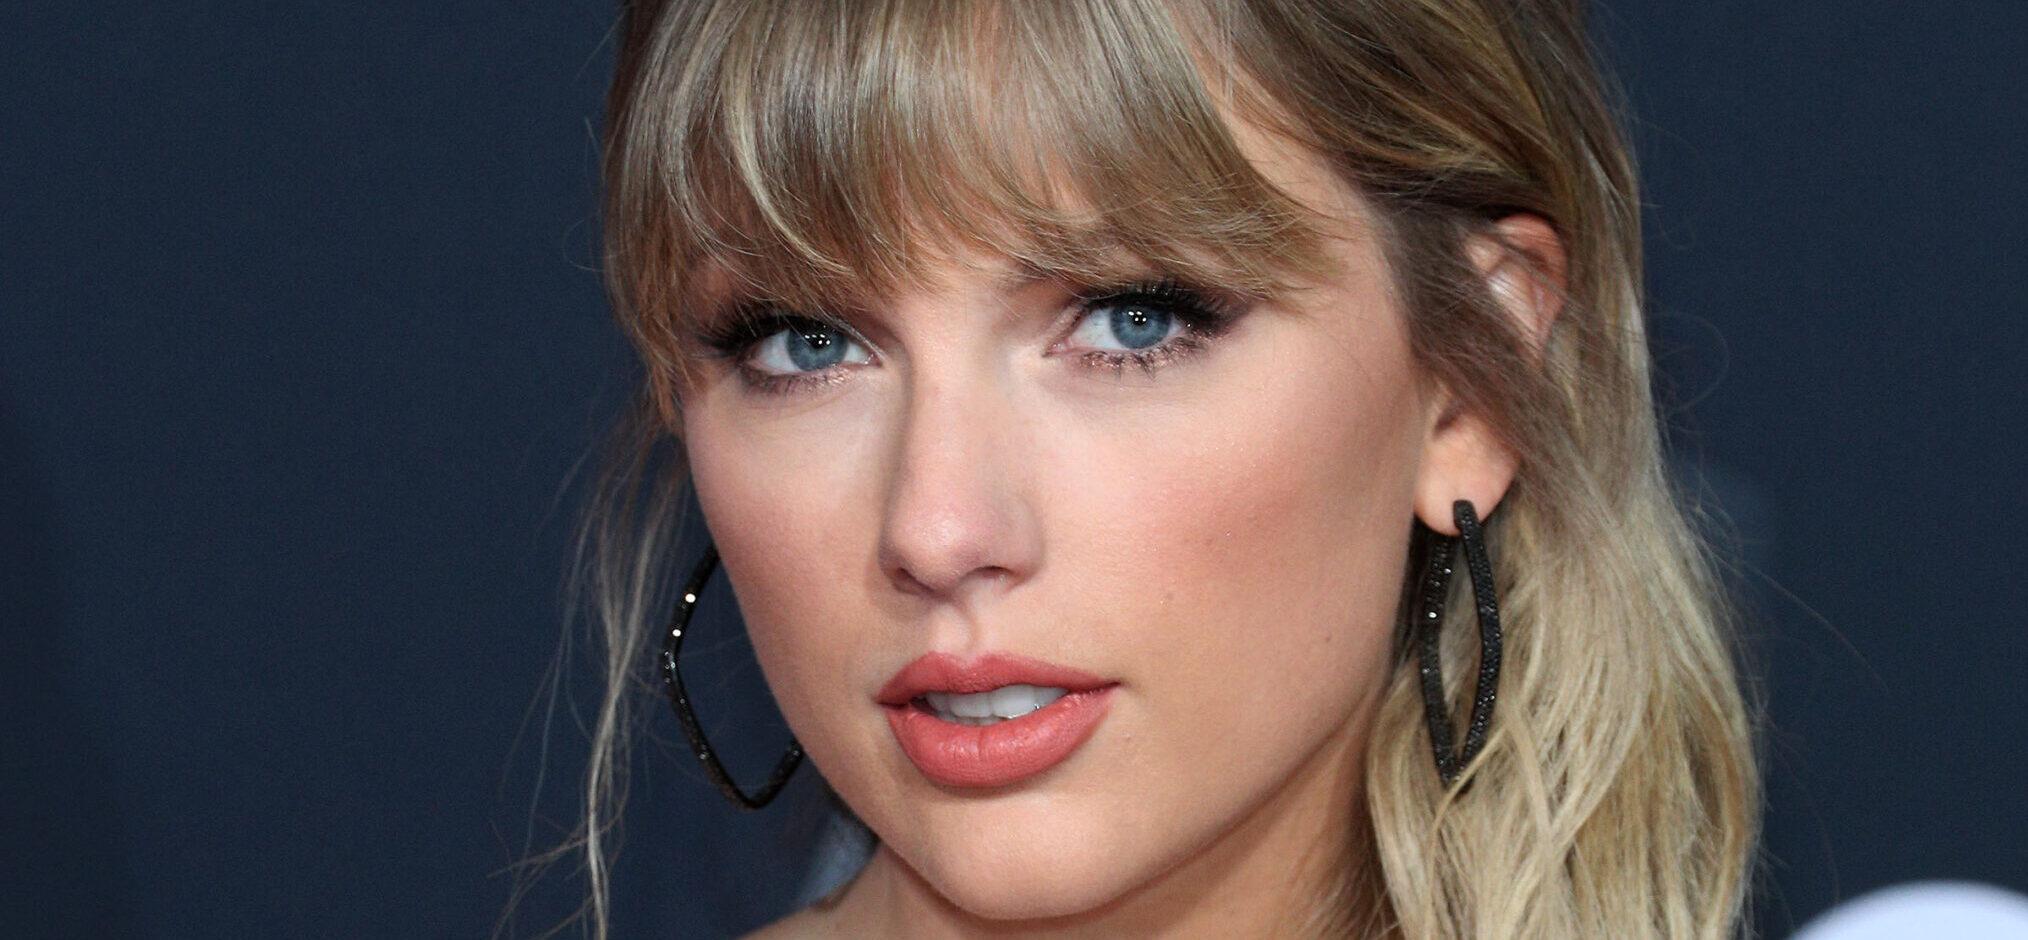 Fans Claim ‘Drunk’ Taylor Swift Was ‘Chugging Vodka’ At Grammys After-Party